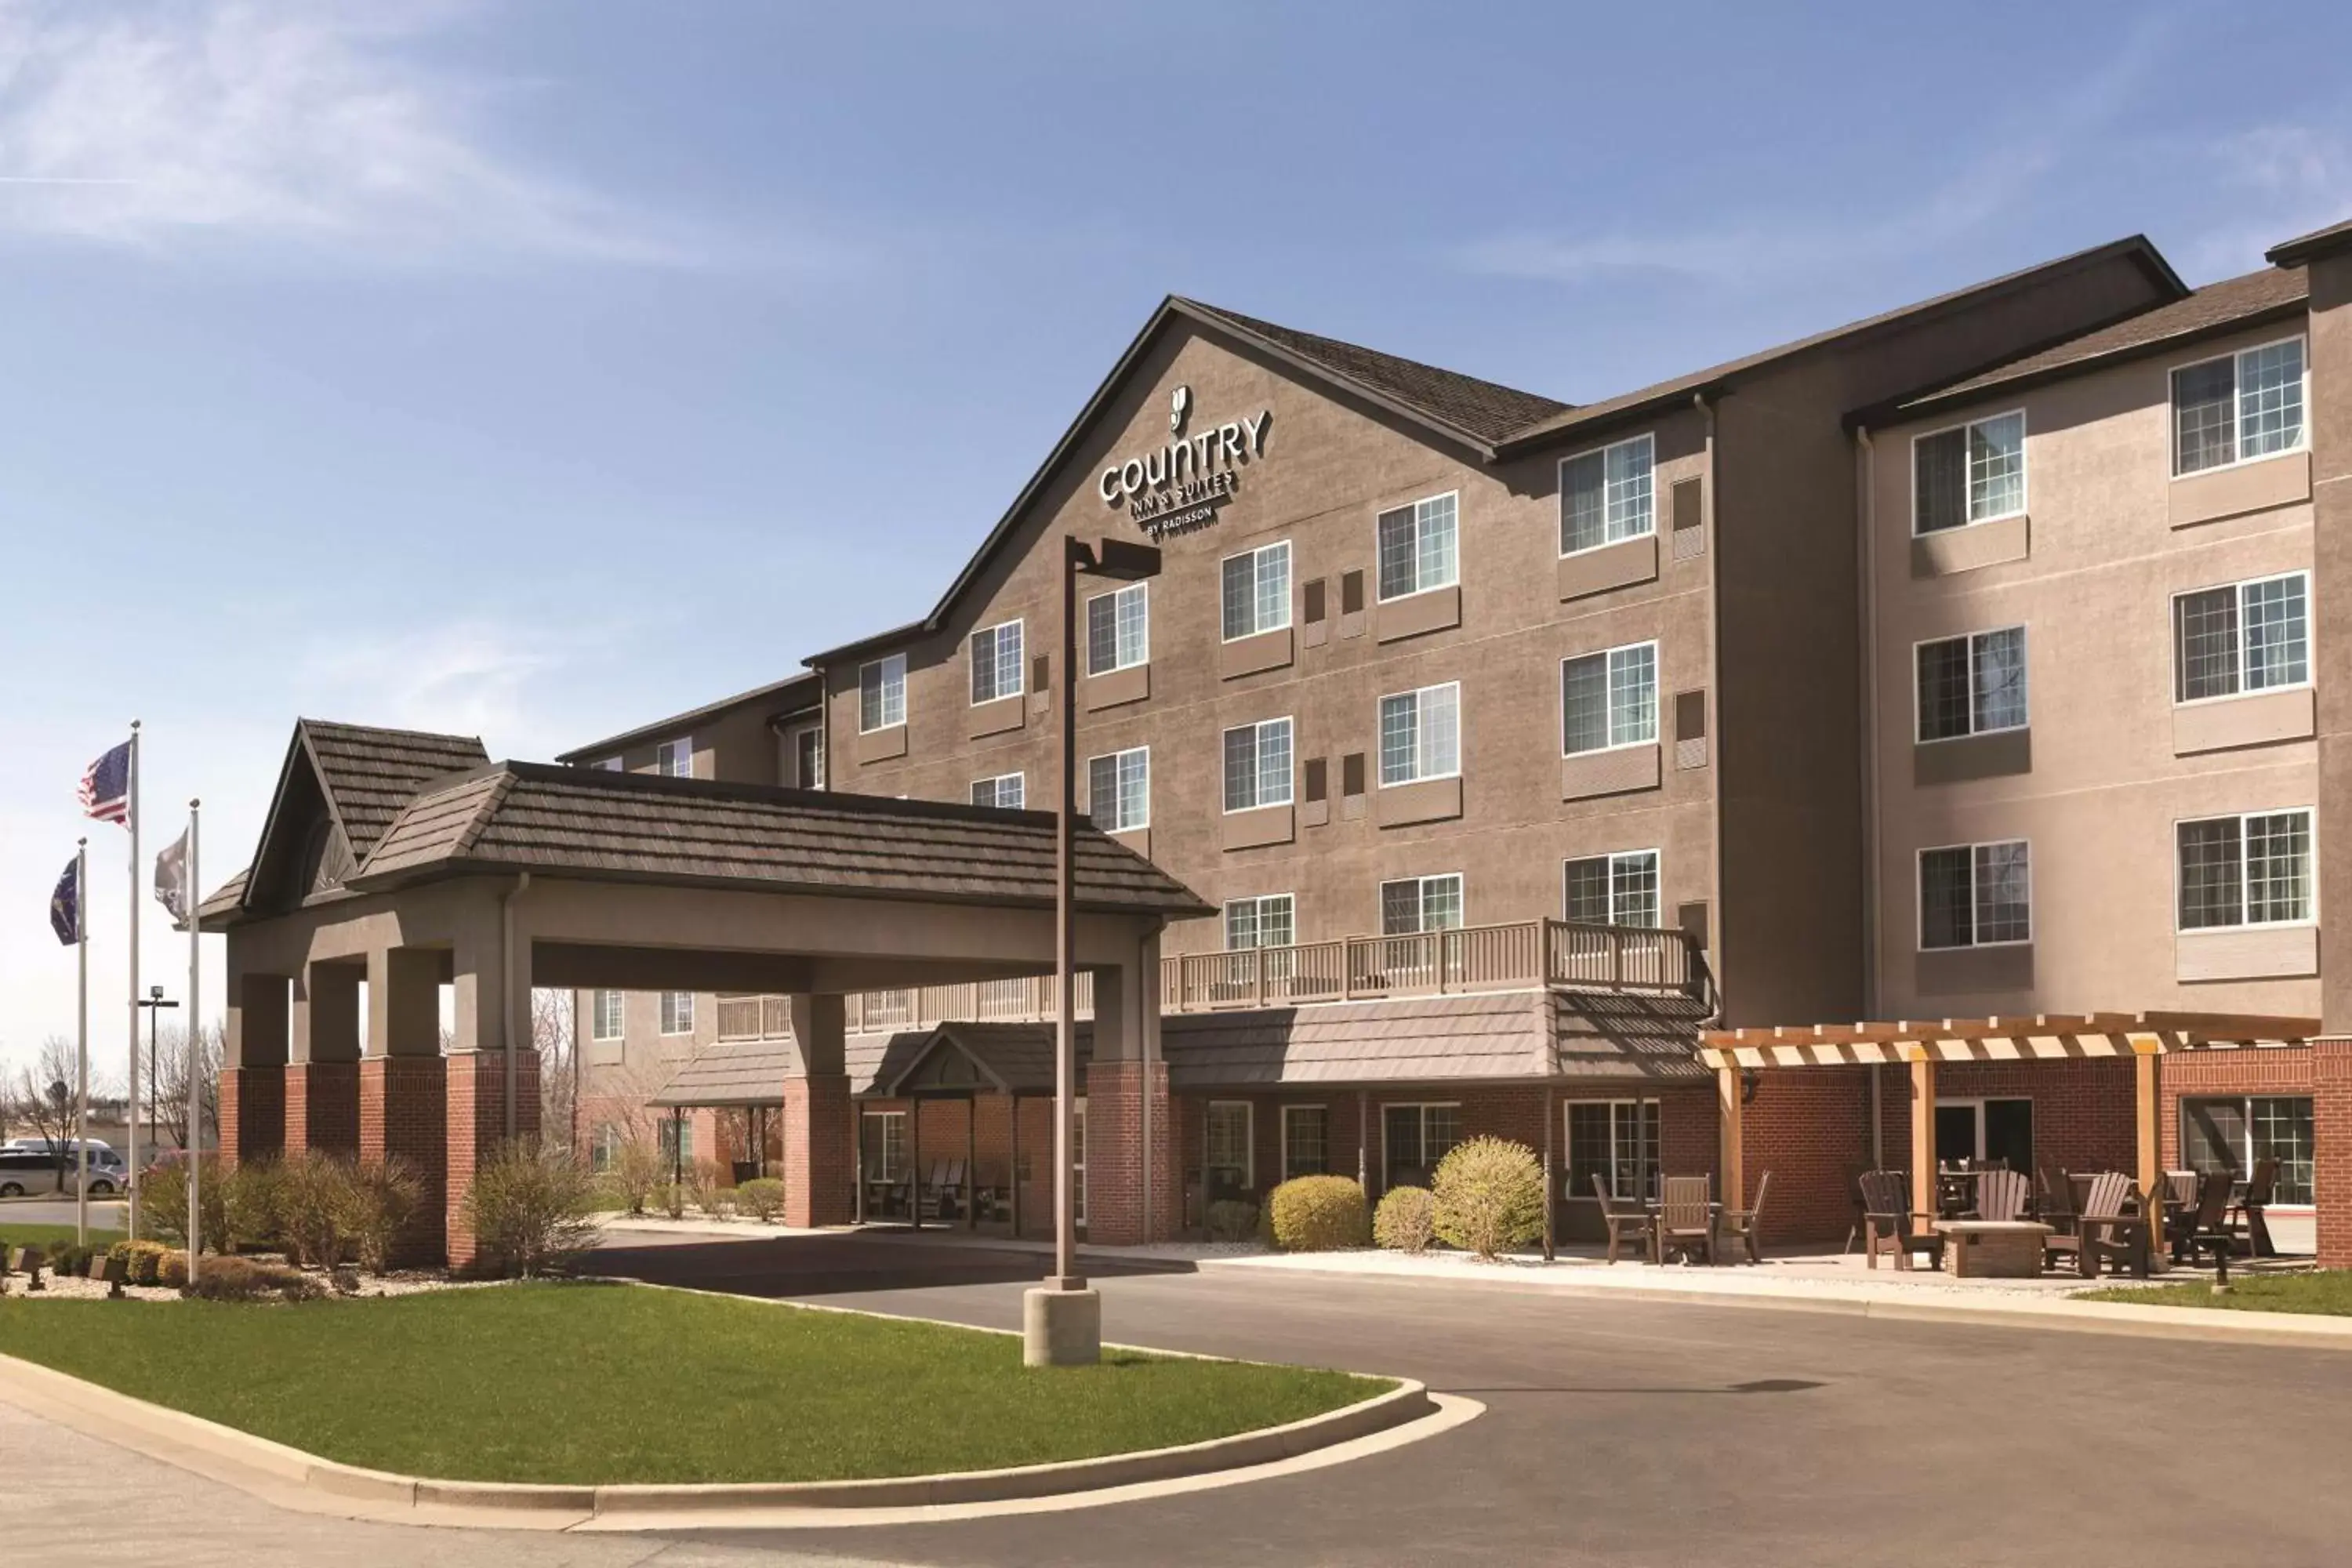 Property building in Country Inn & Suites by Radisson, Indianapolis Airport South, IN